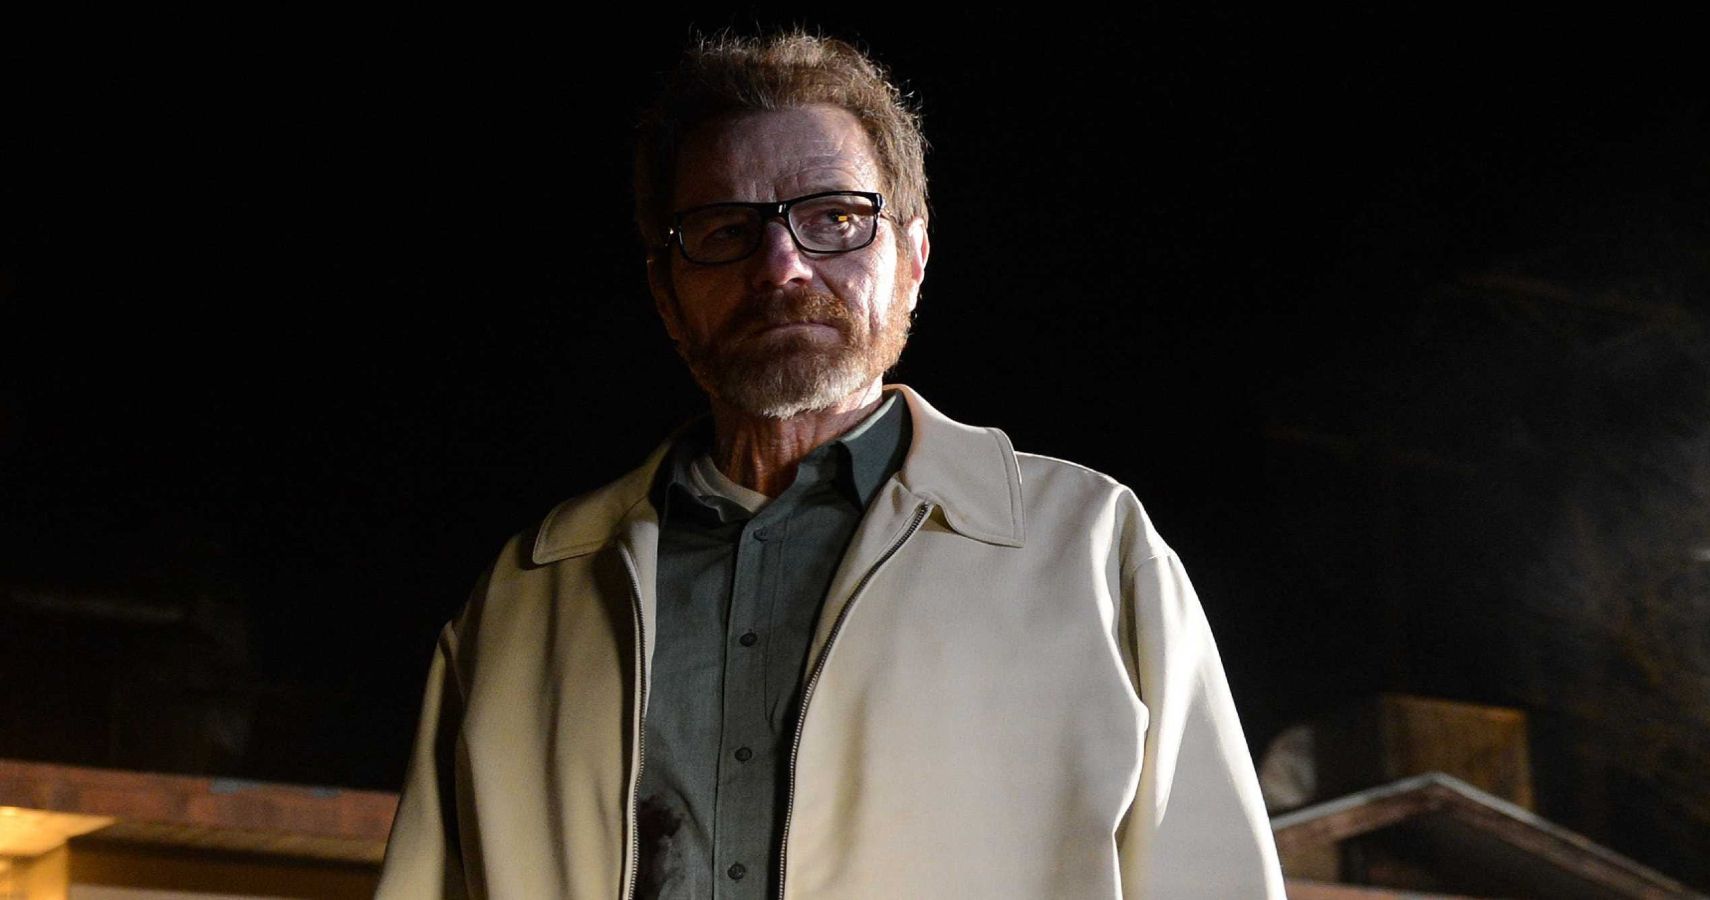 Breaking Bad': All Major Deaths Explained and Ranked by Sadness